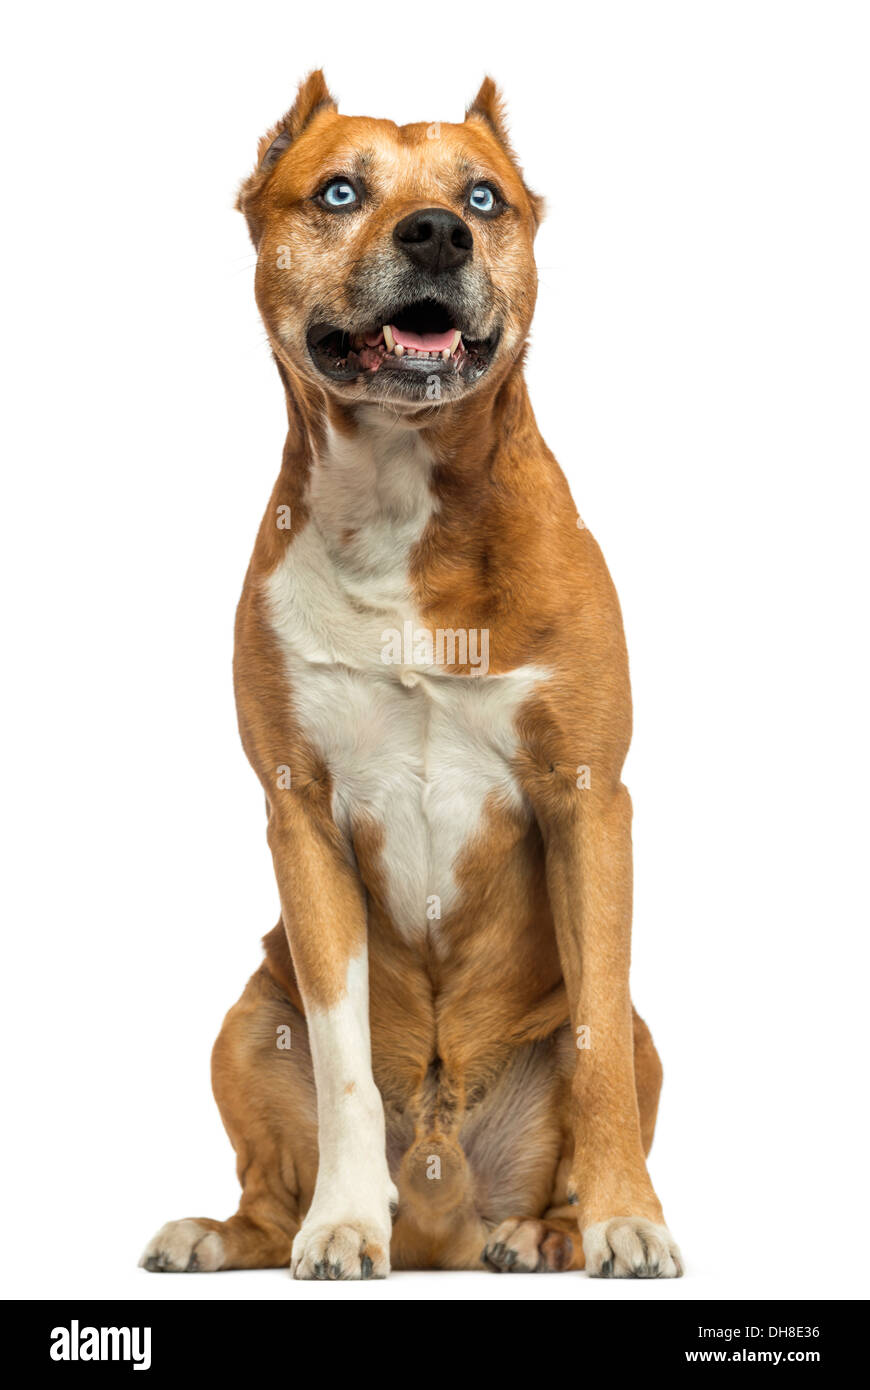 American Staffordshire Terrier sitting against white background Stock Photo